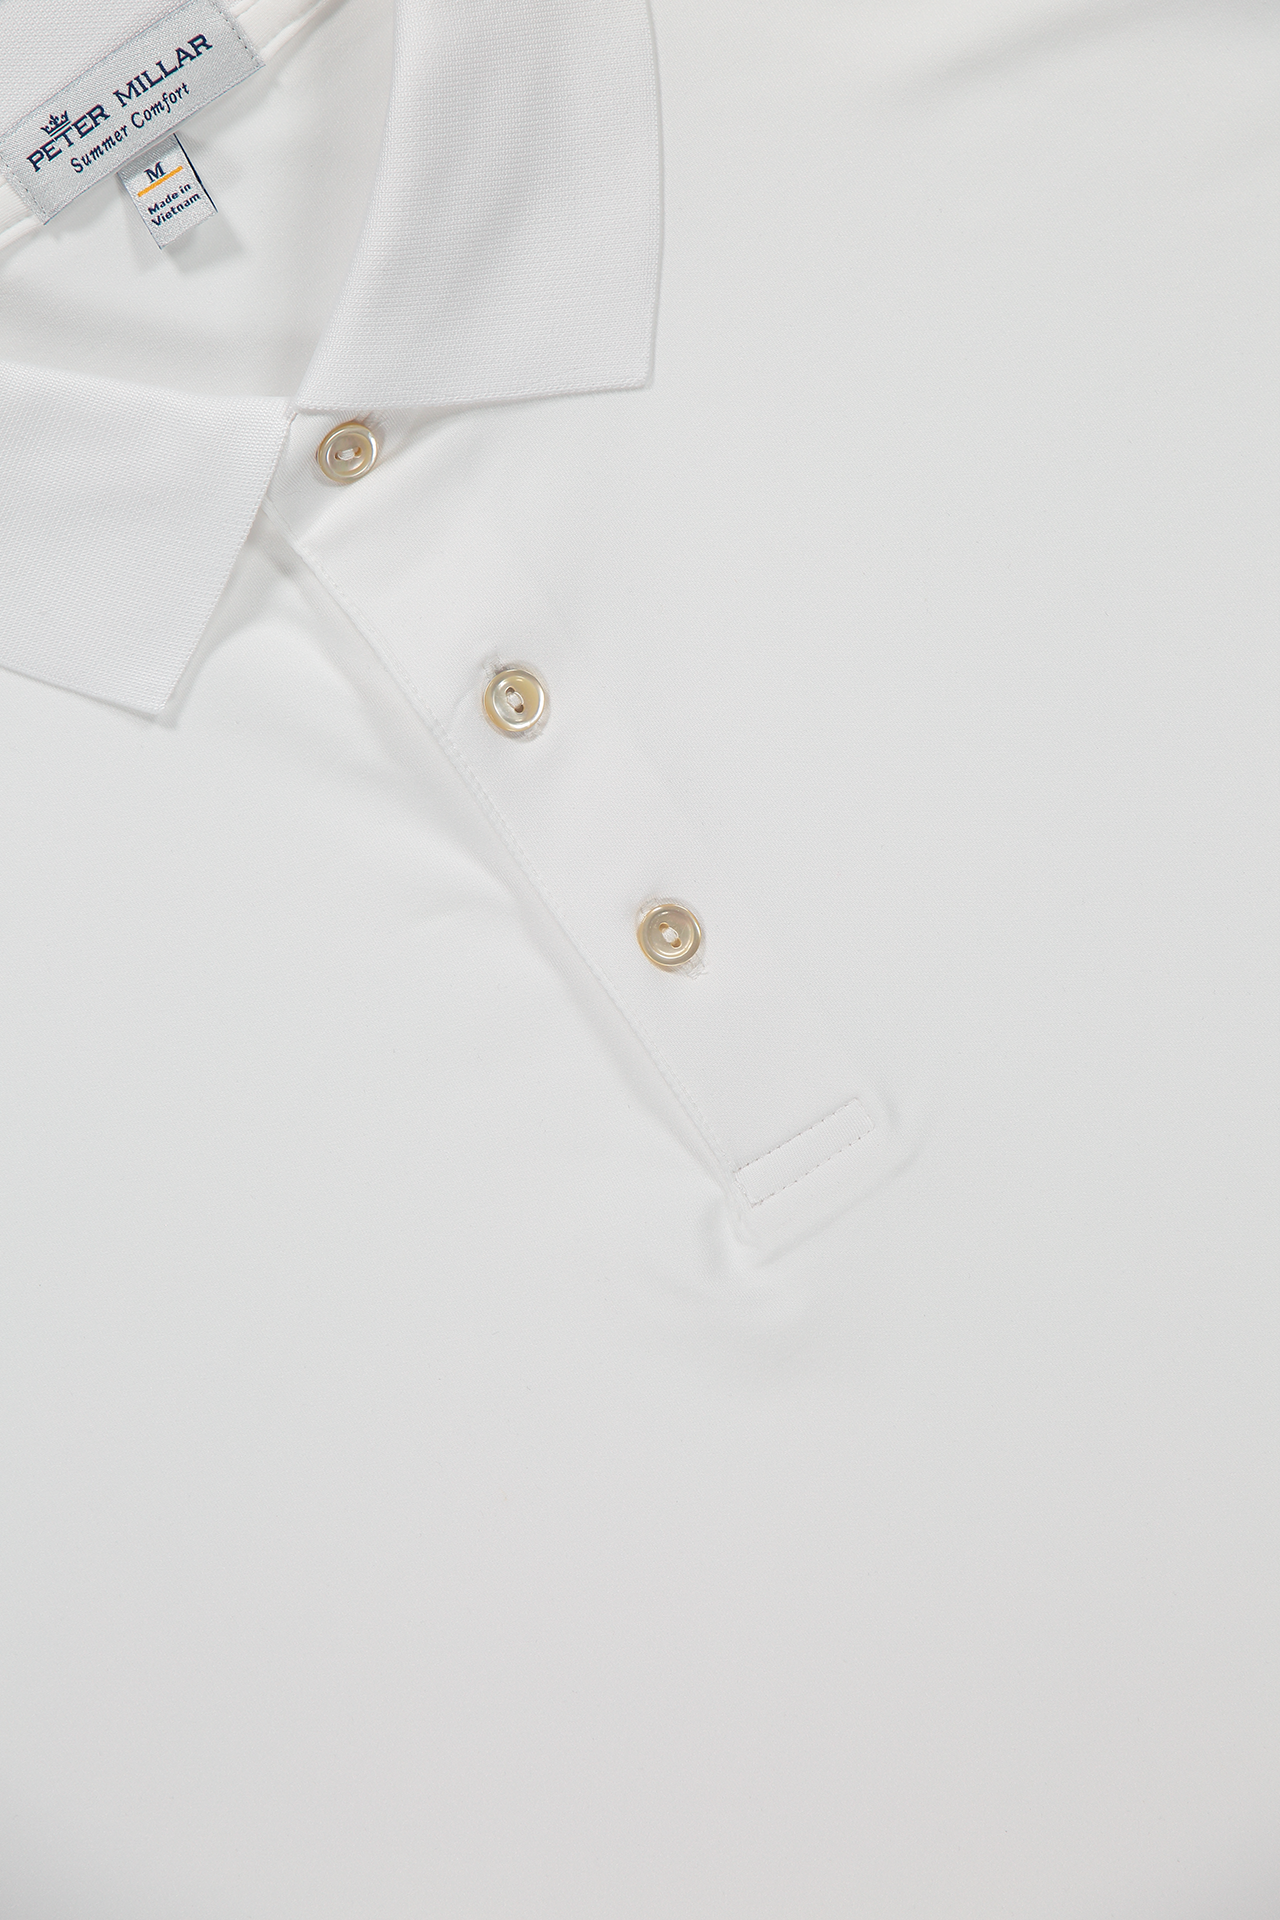 Peter Millar Solid Performance Jersey Polo in White - Collar Detail Image  (6606330462323)